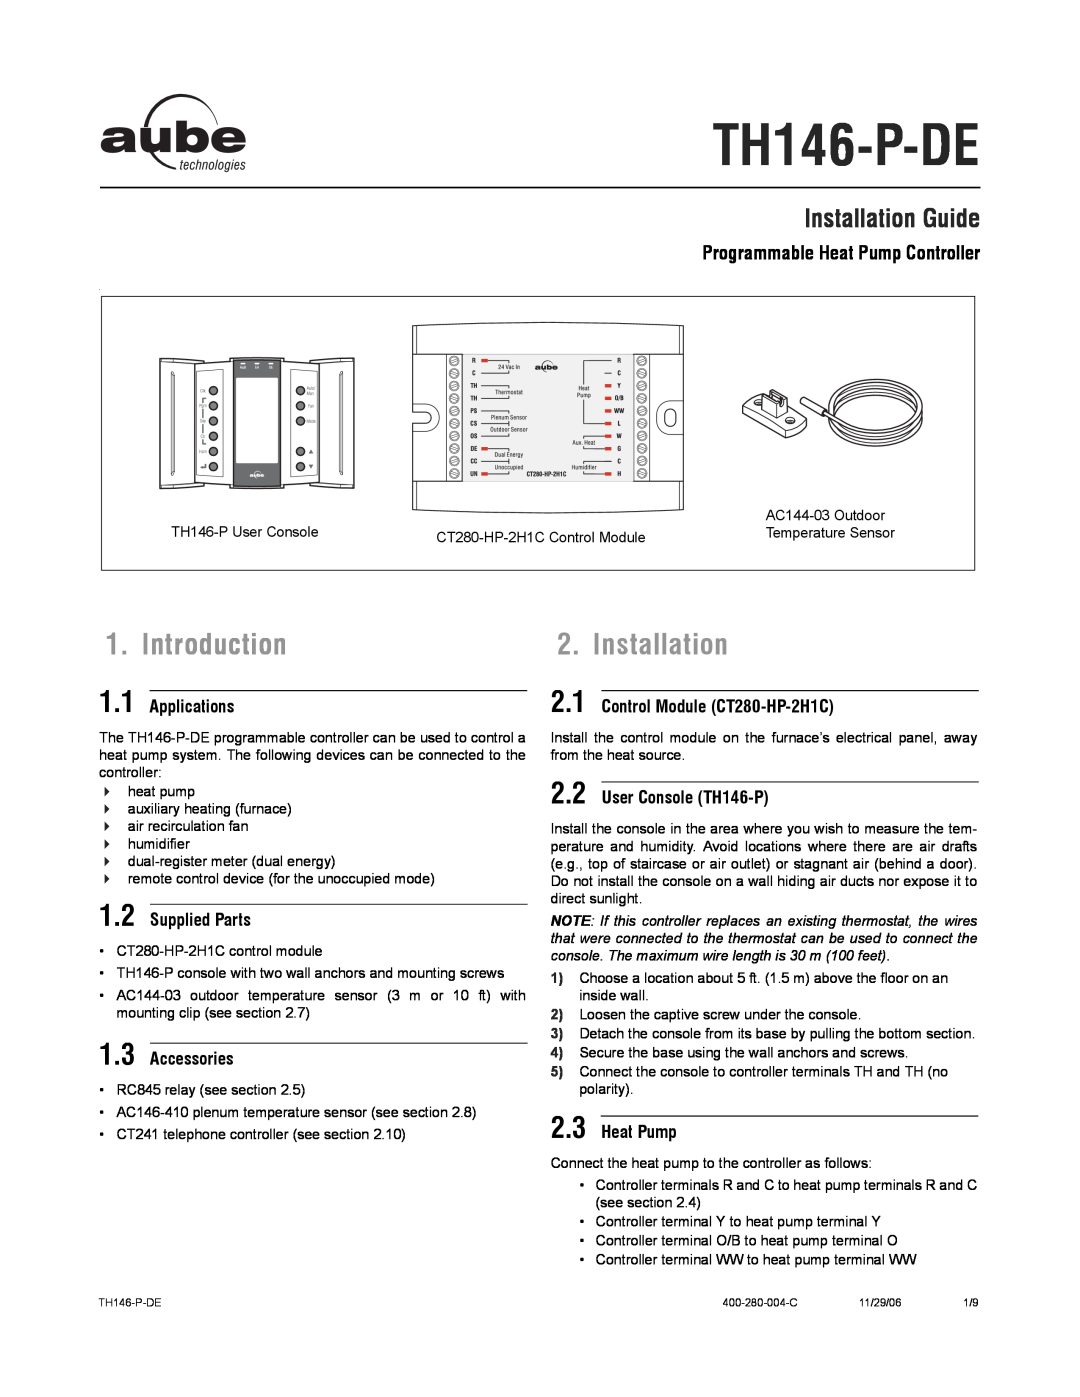 Aube Technologies TH146-P-DE manual Introduction, Installation Guide, Programmable Heat Pump Controller, Applications 